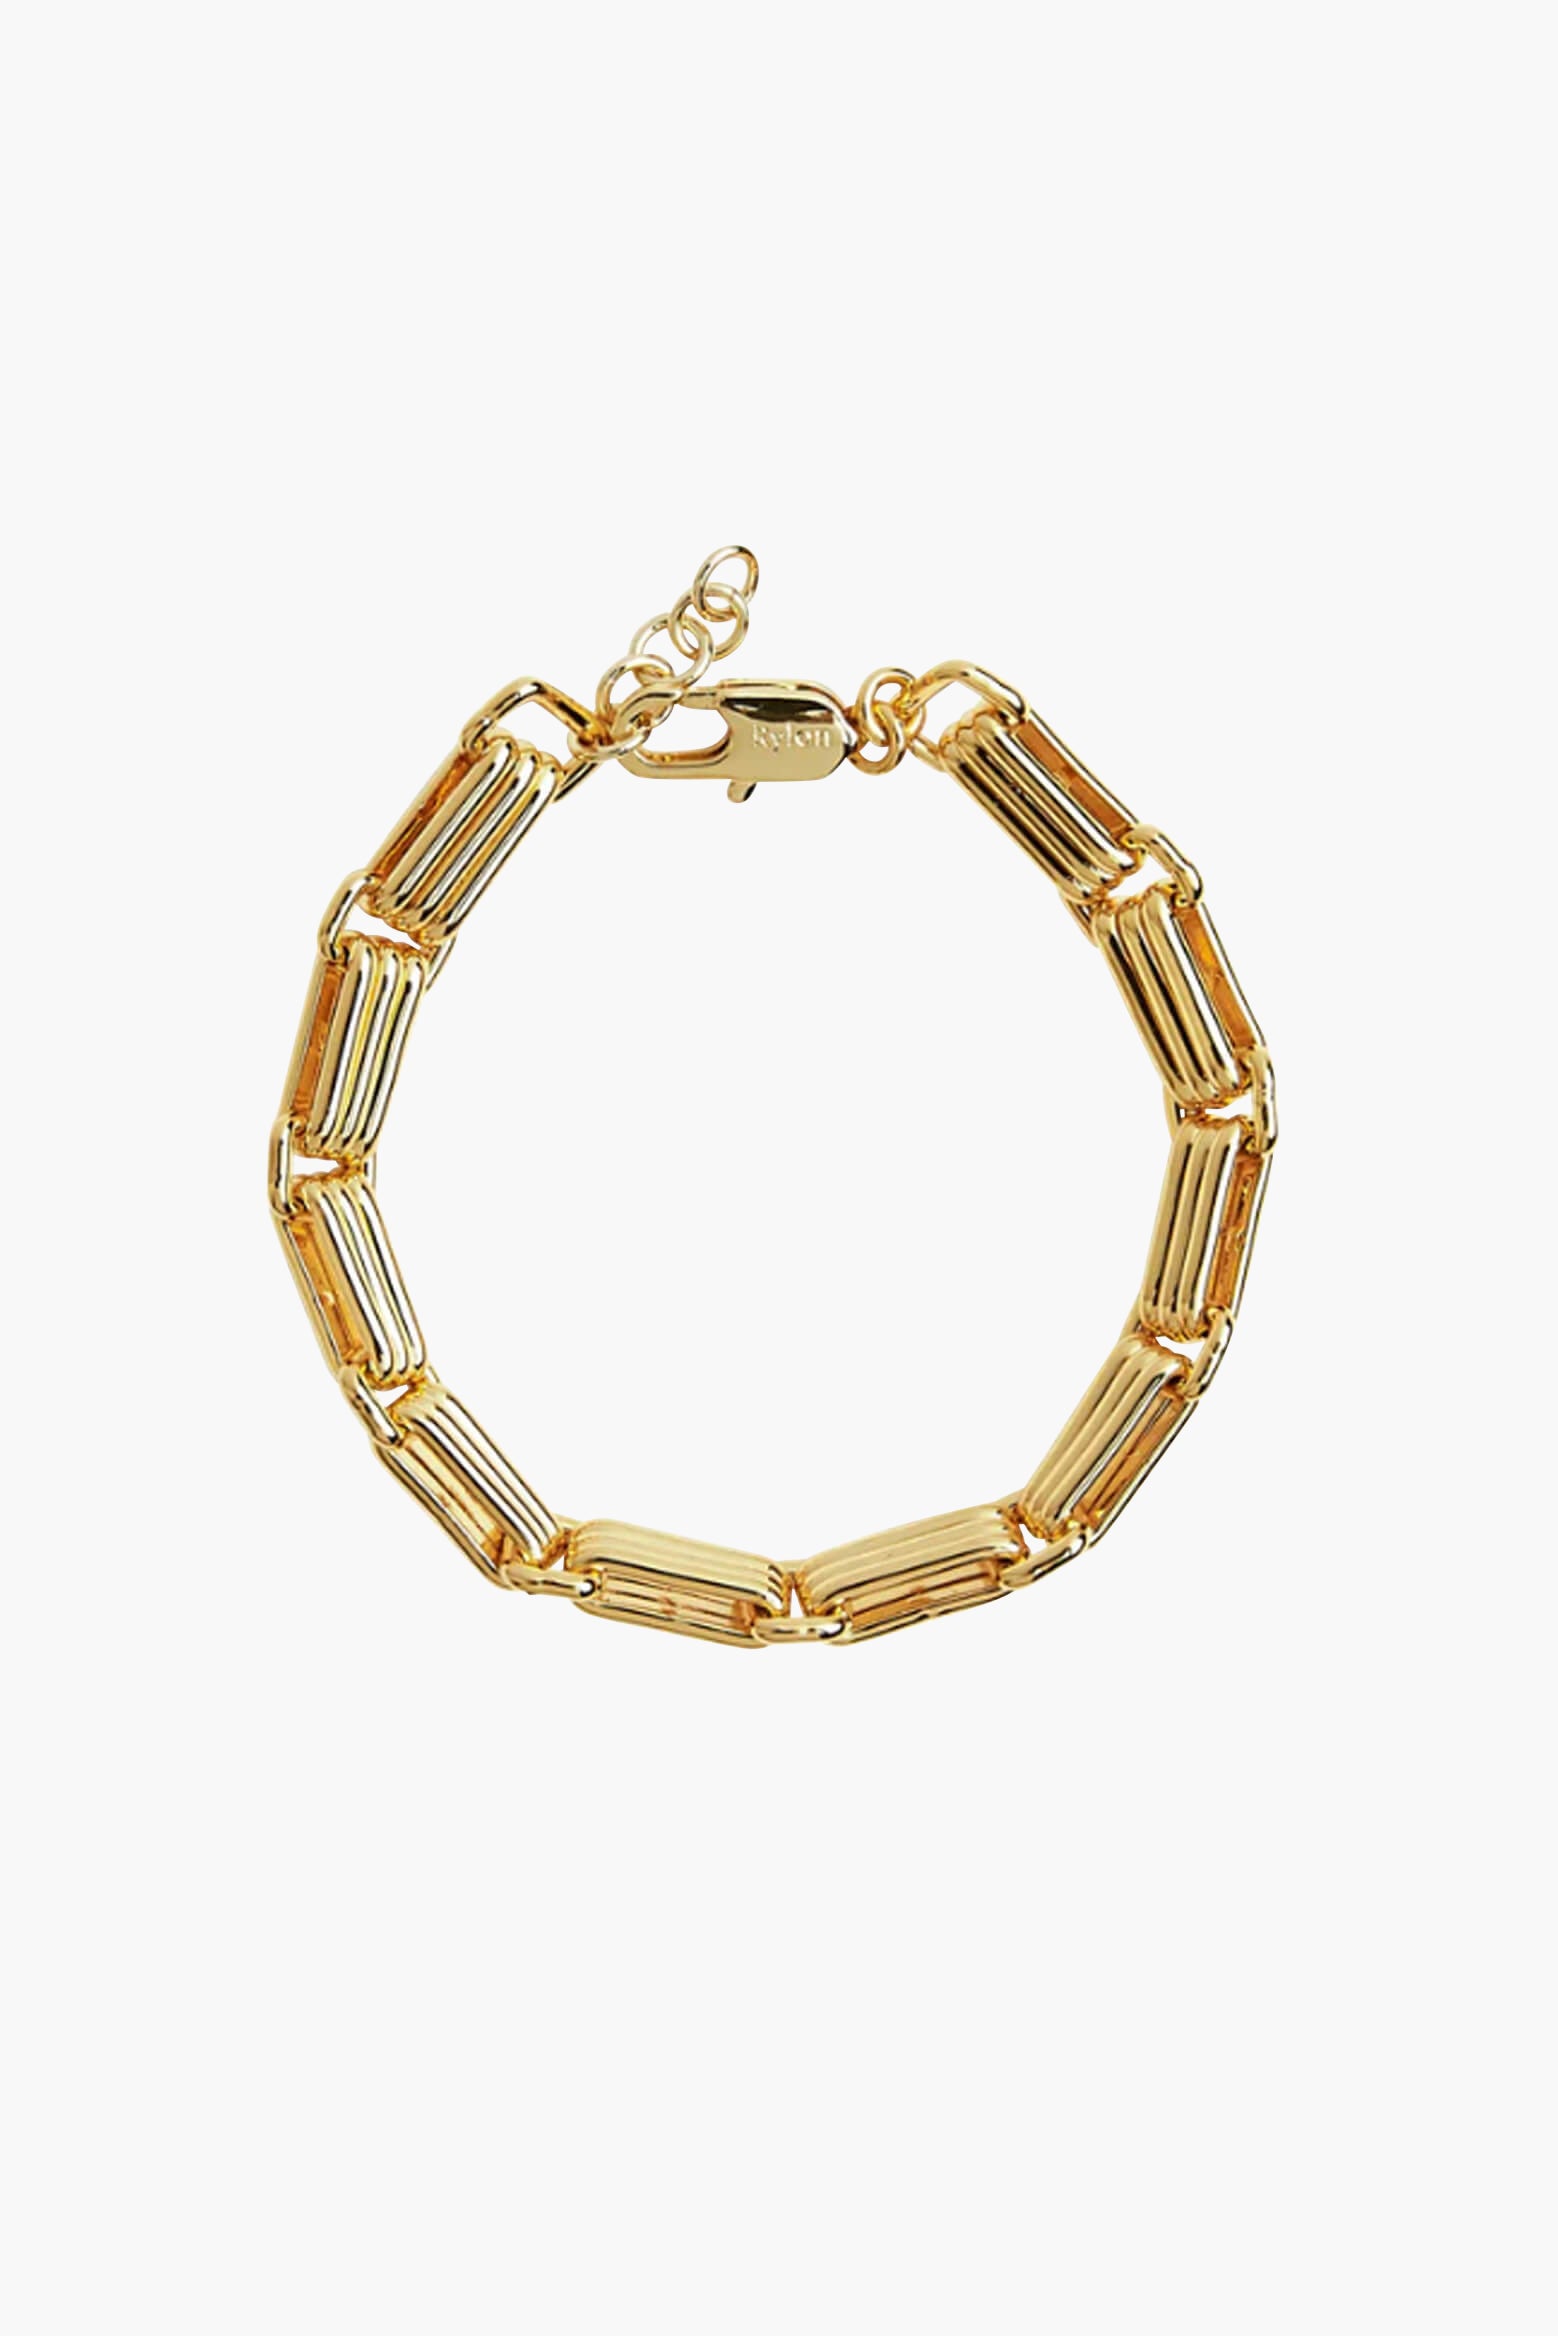 Rylan Flat Link Bracelet available at The New Trend